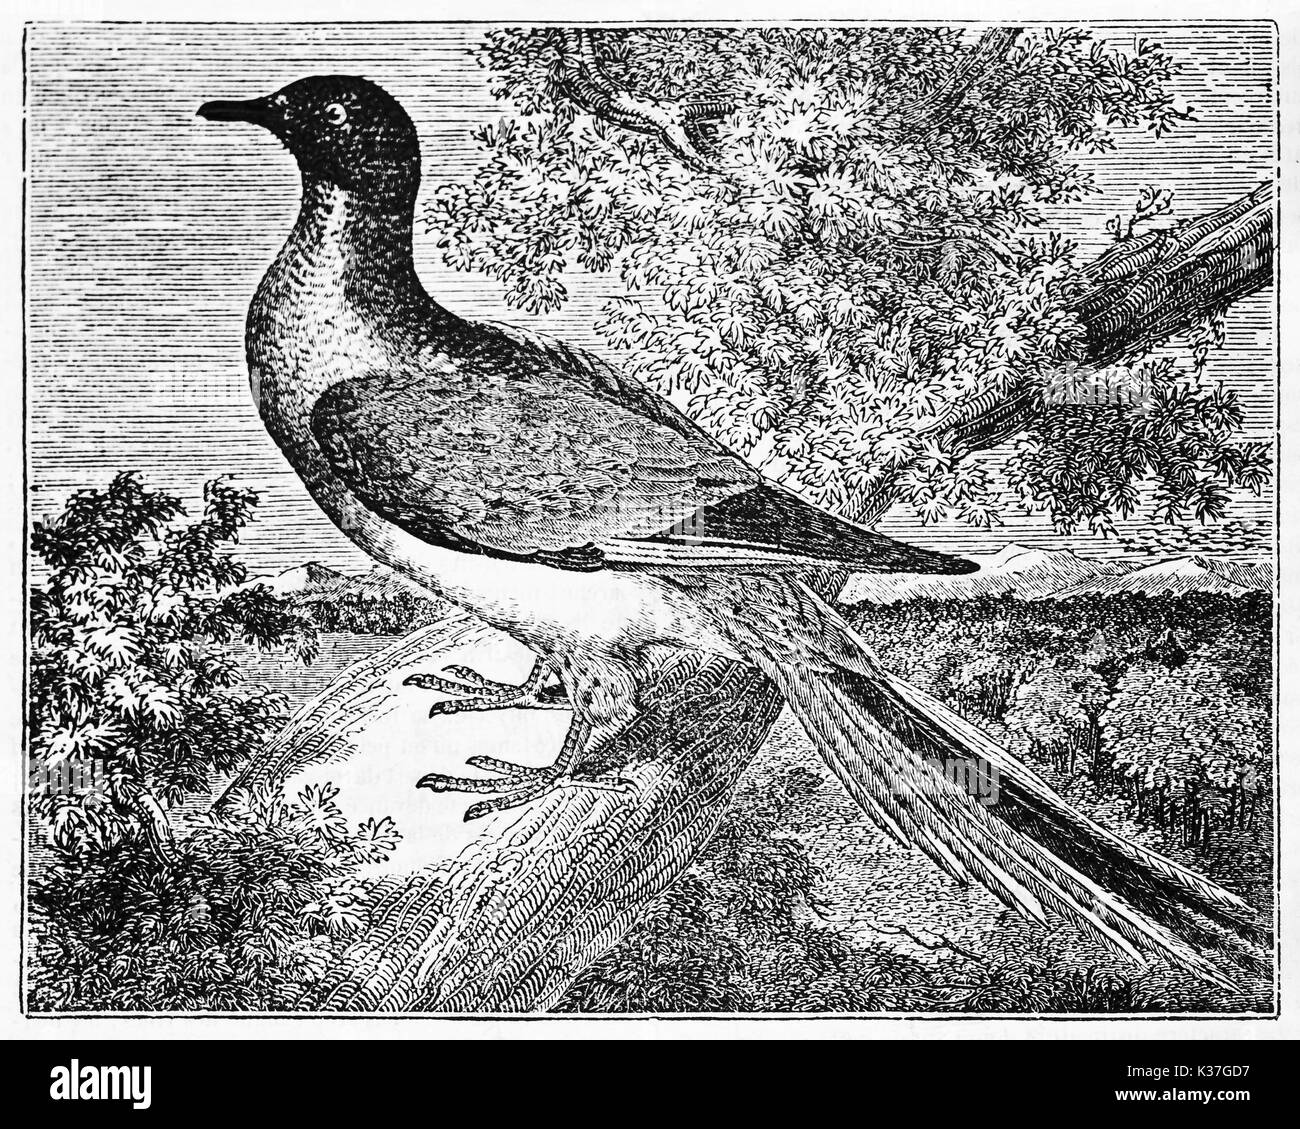 Bird on a branch, passenger pigeon (Ectopistes migratorius) extinct since 1914. Old Illustration by unidentified author, published on Magasin Pittoresque, Paris, 1834 Stock Photo